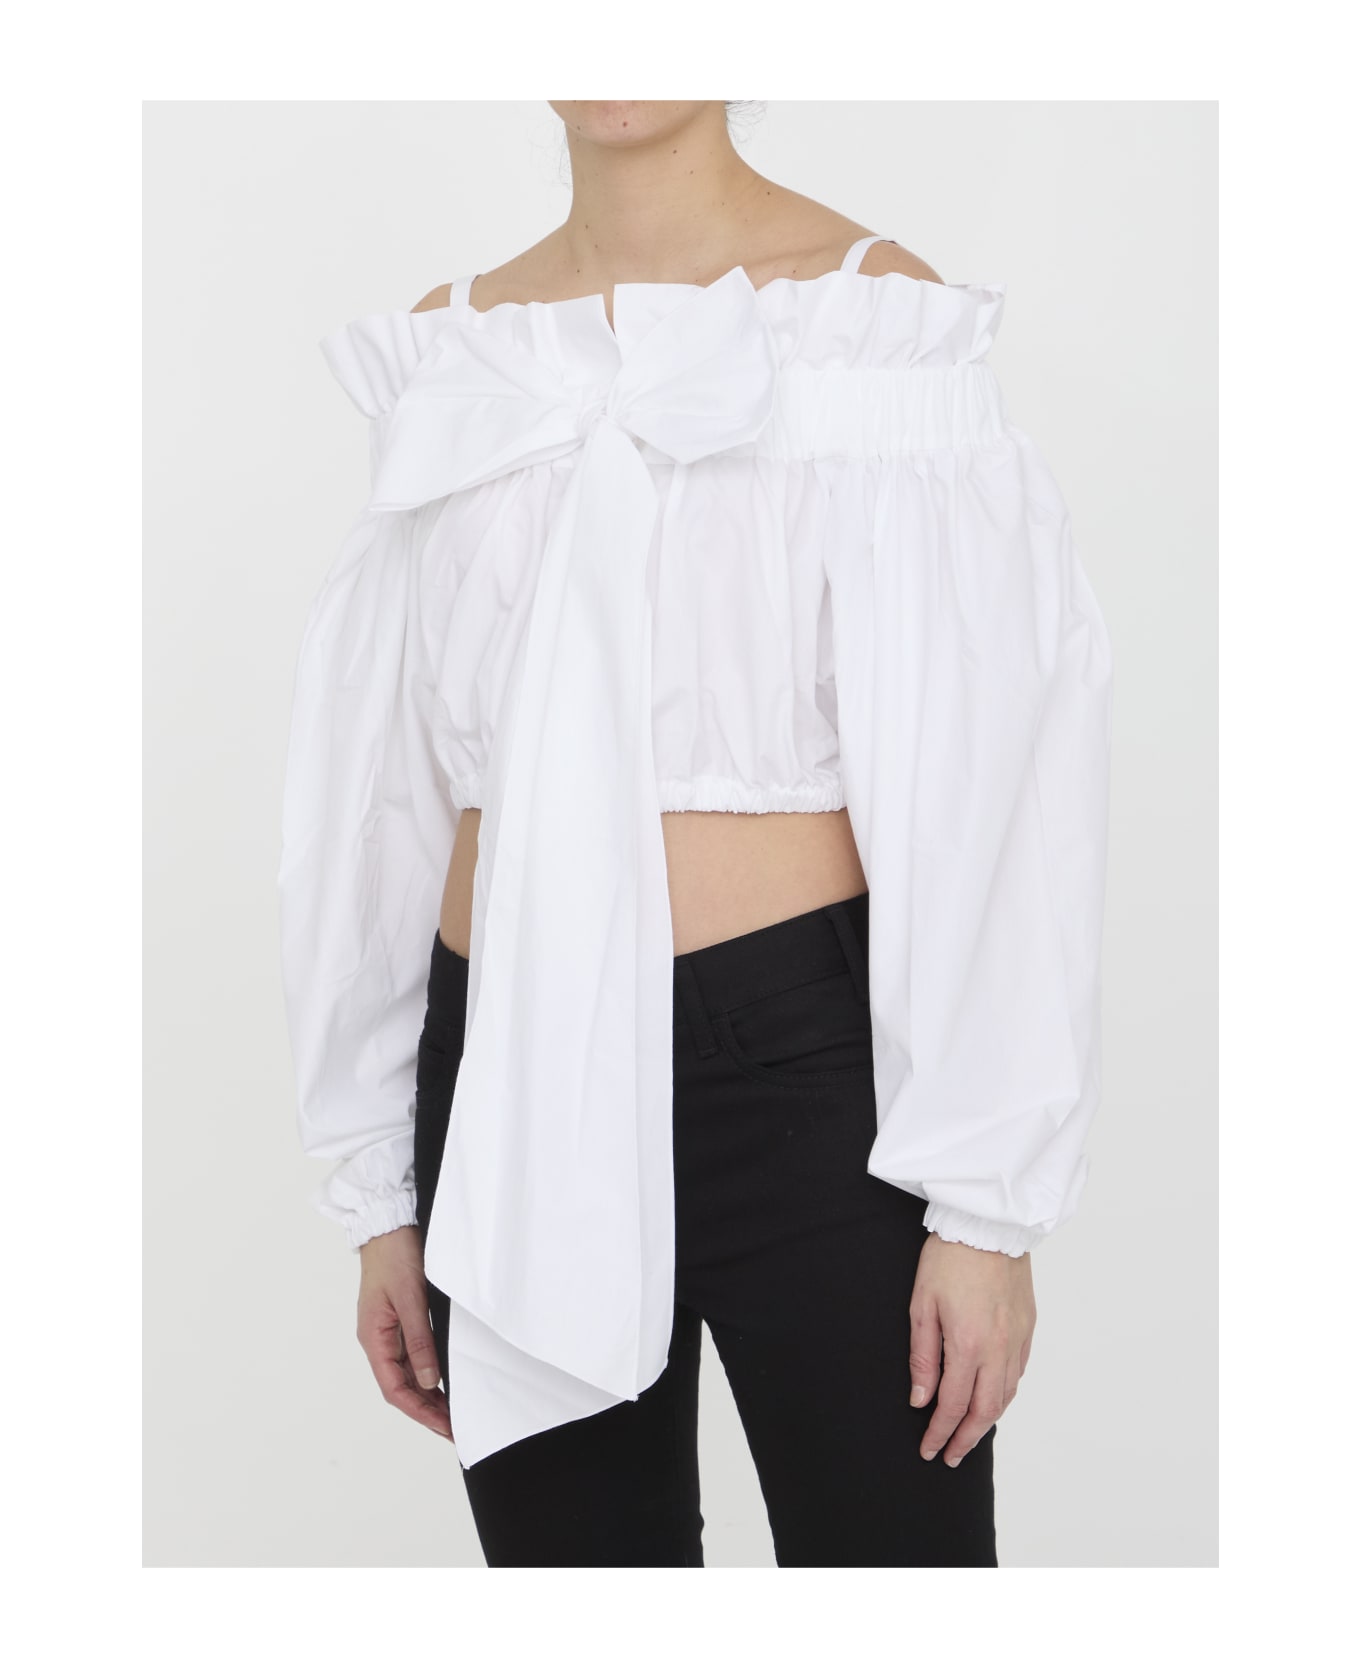 Patou Bustier Top - WHITE ブラウス